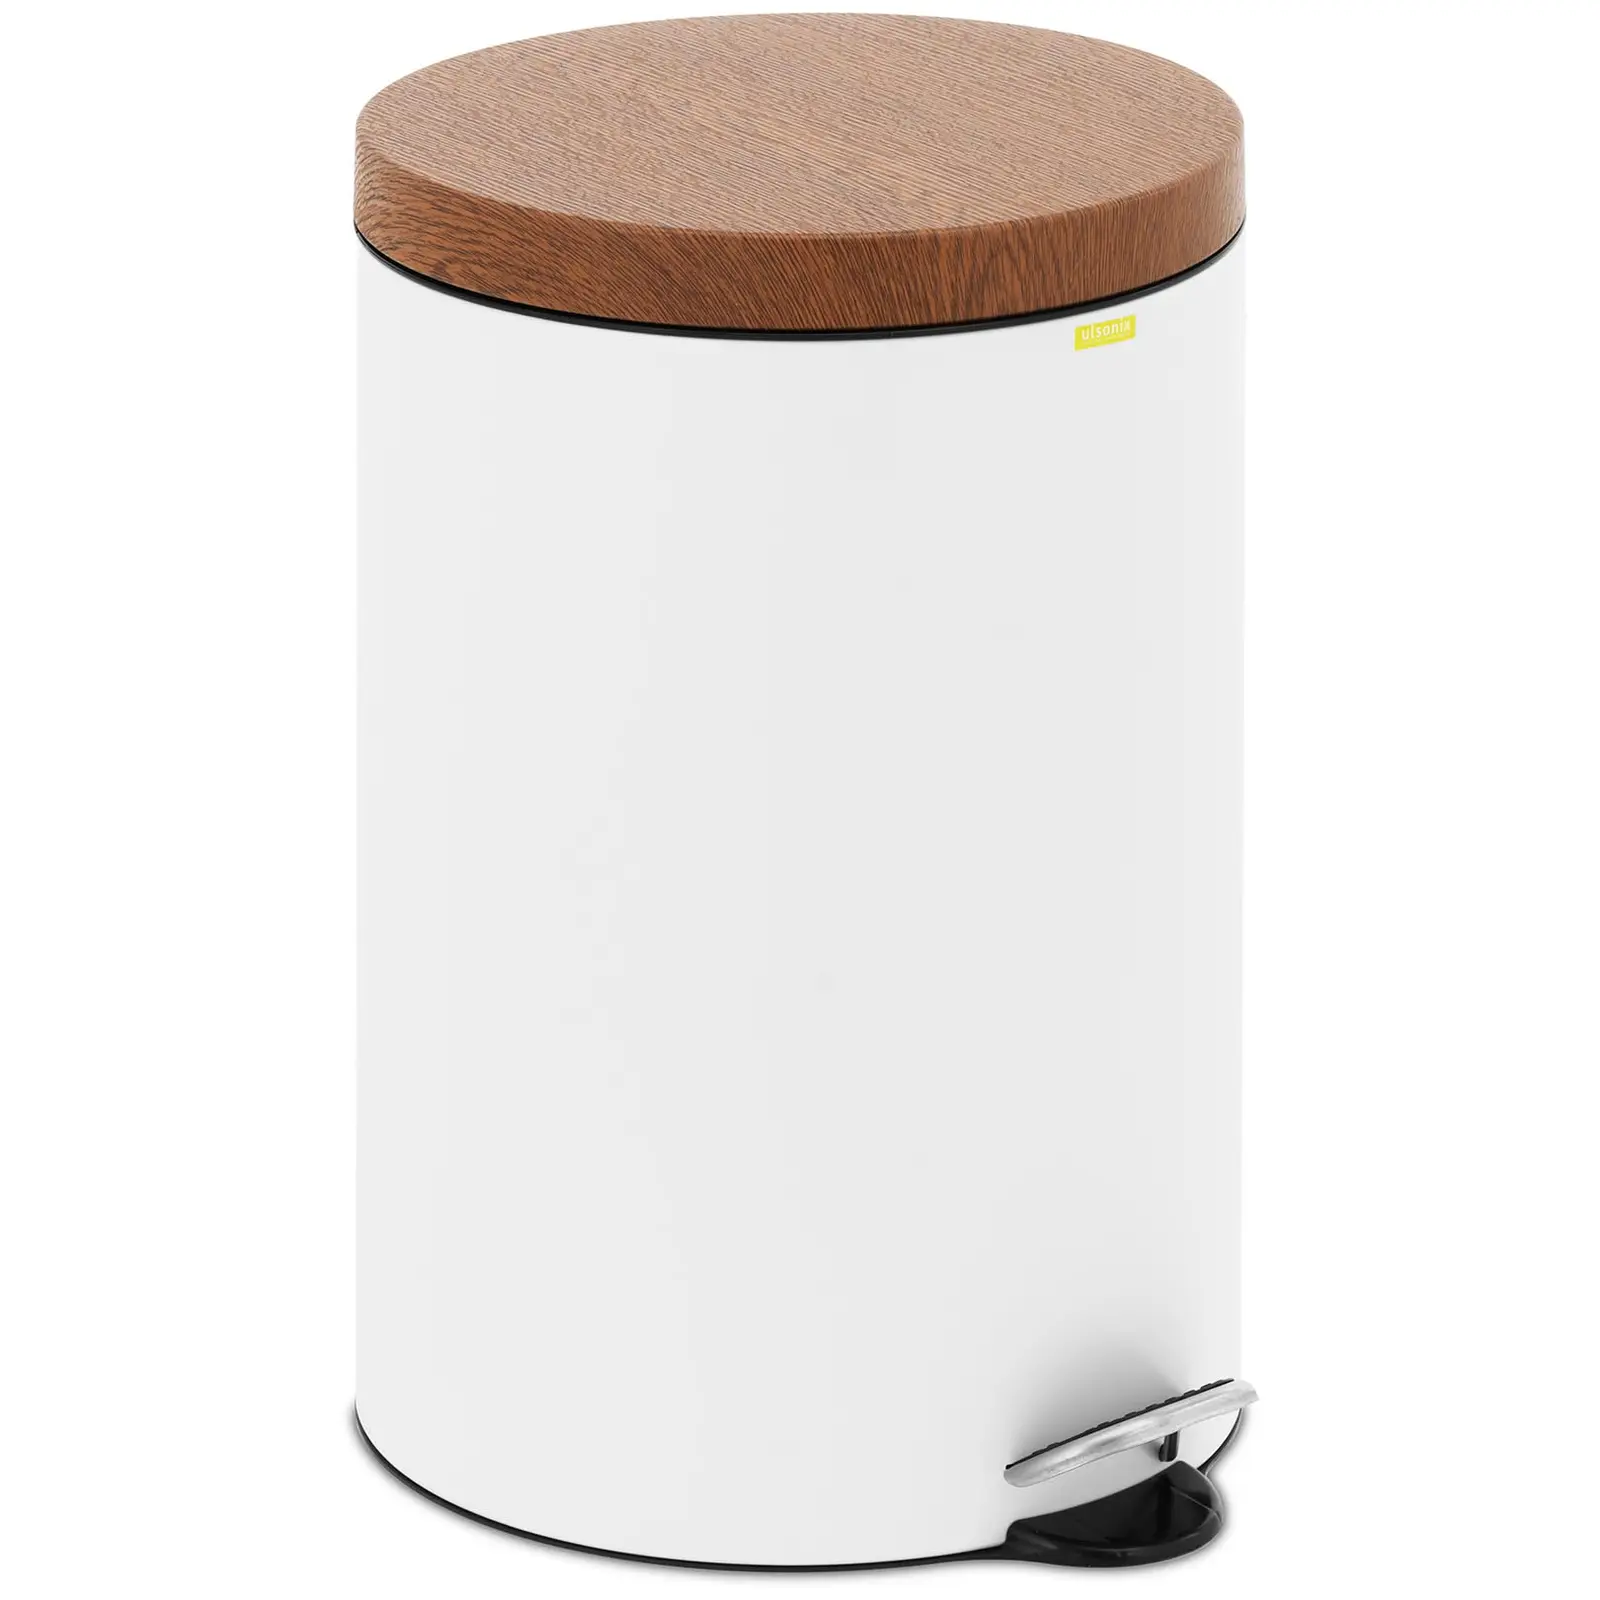 Pedal Bin - with imitation wooden lid - 20 l - white - coated steel